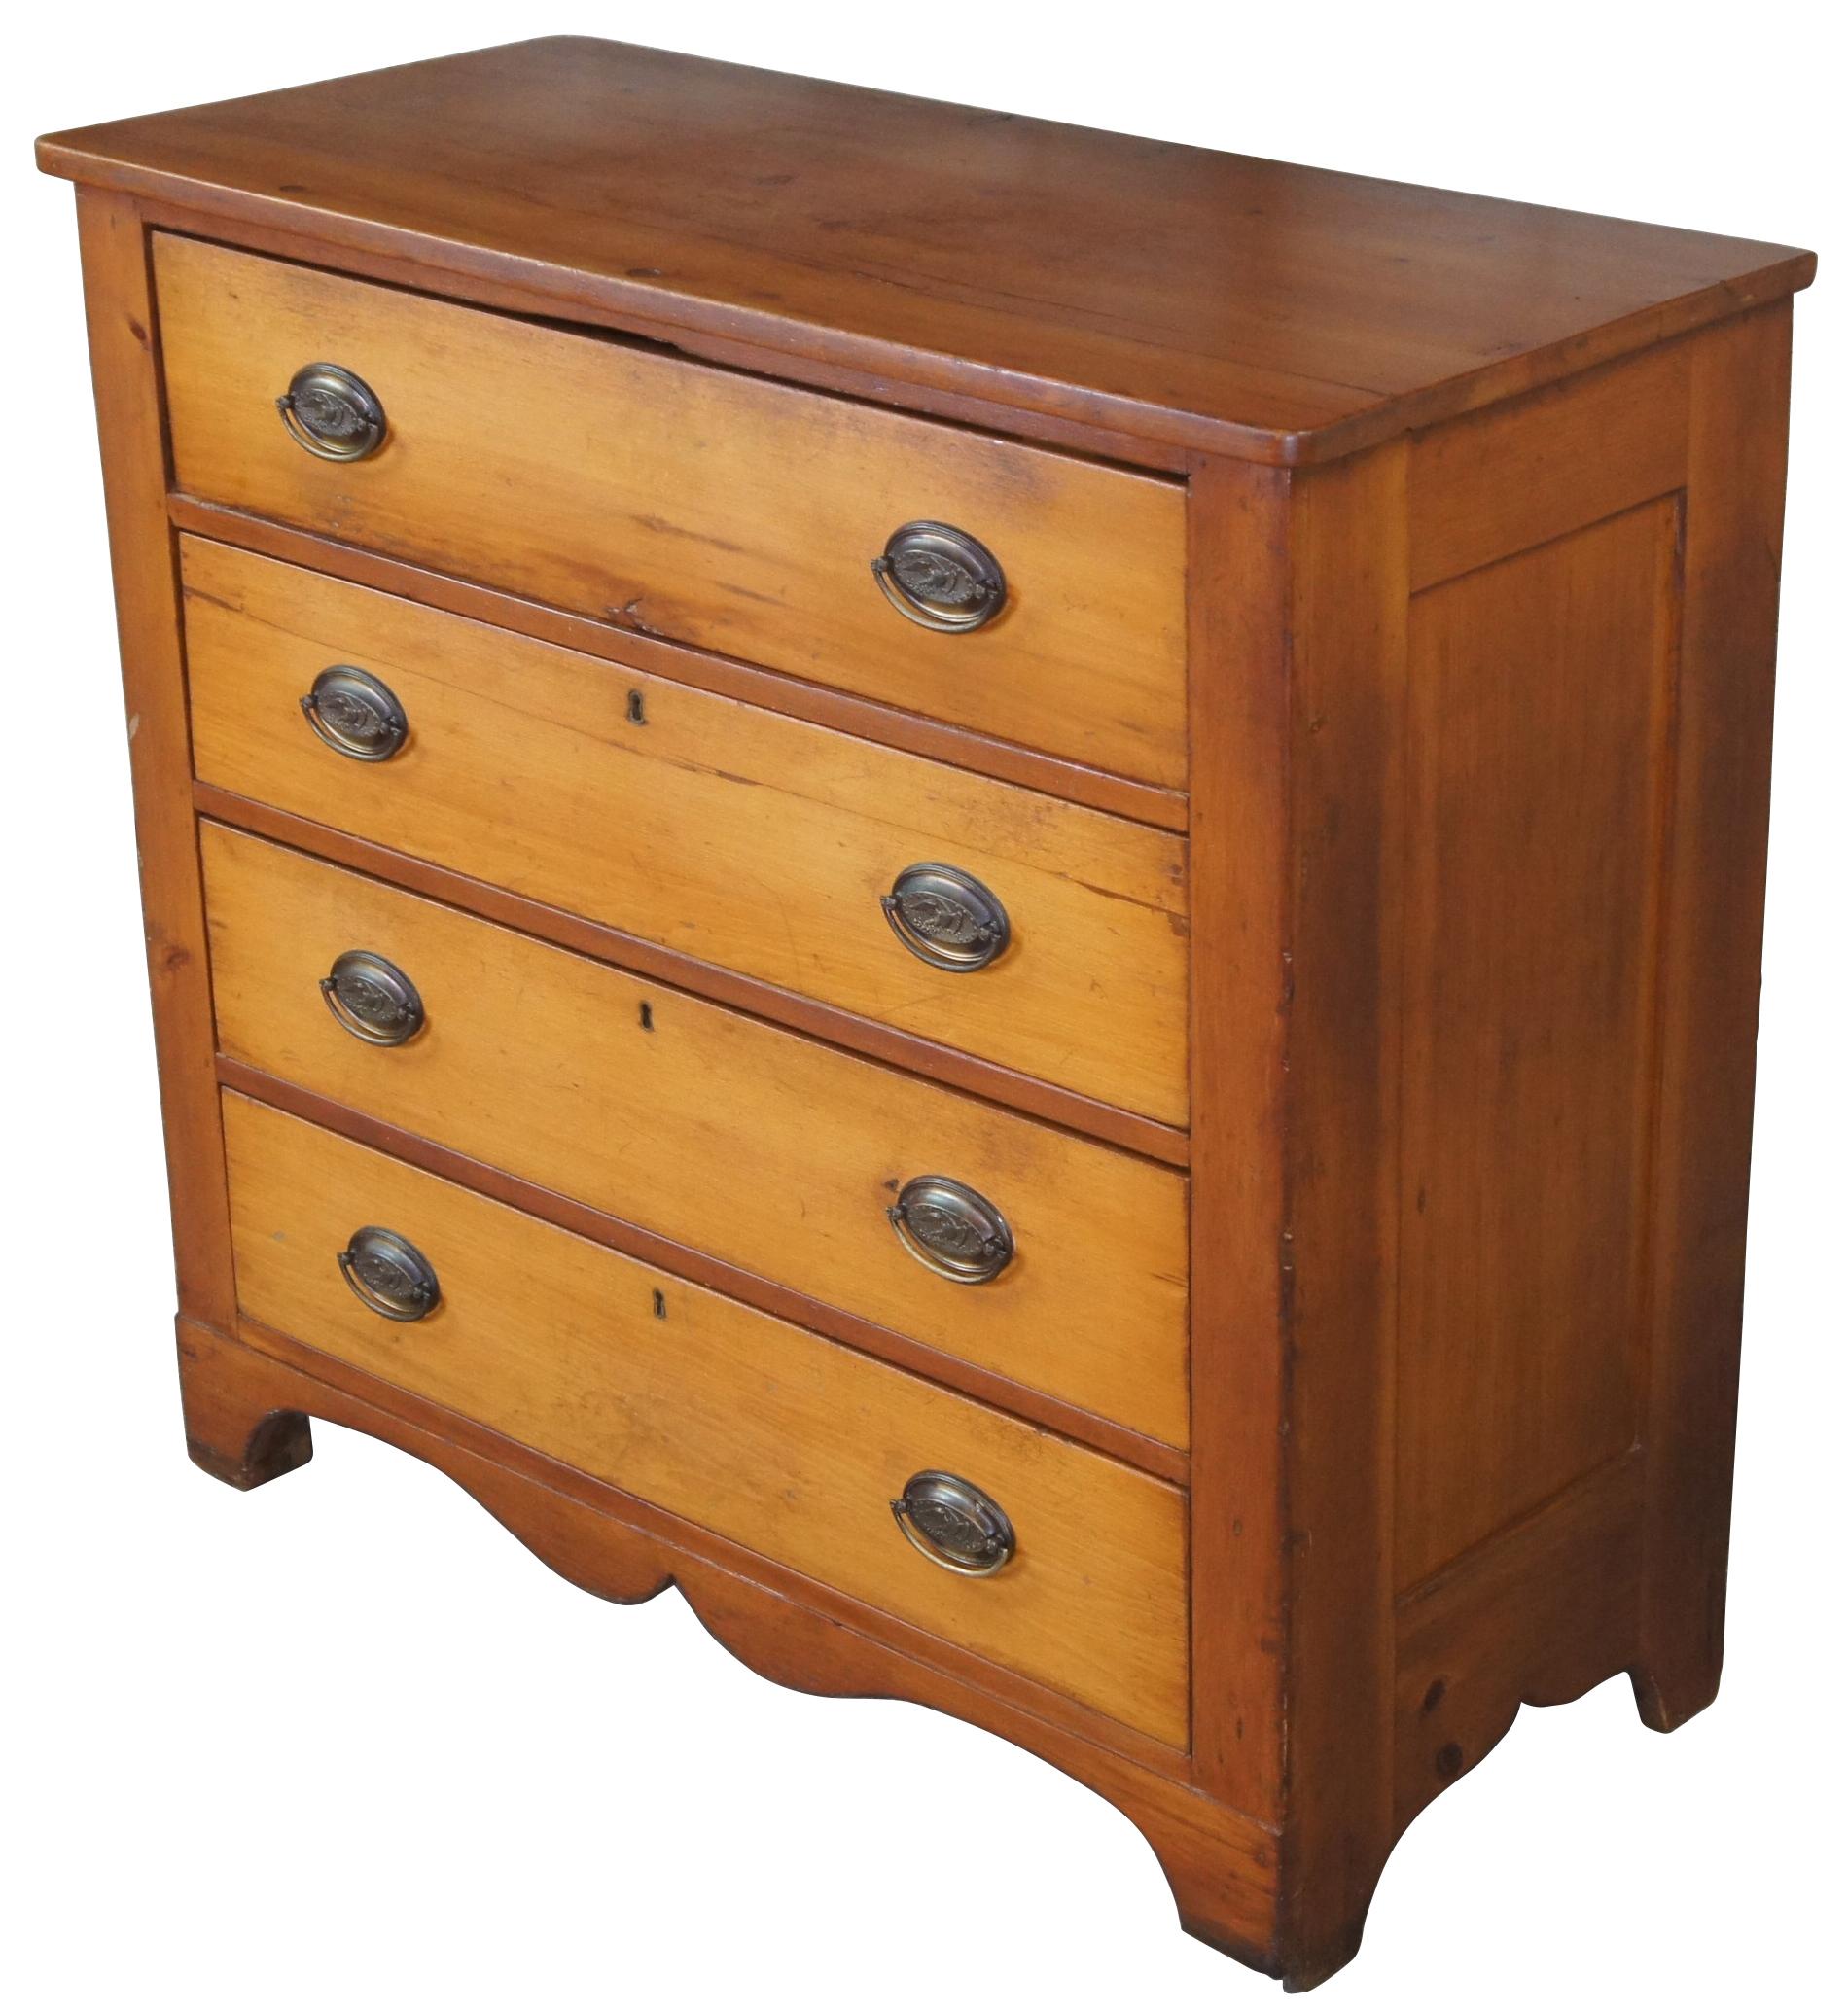 Late 19th century American pine dresser. Rectangular form with four drawers featuring sheraton American Eagle drawer hardware. 
 